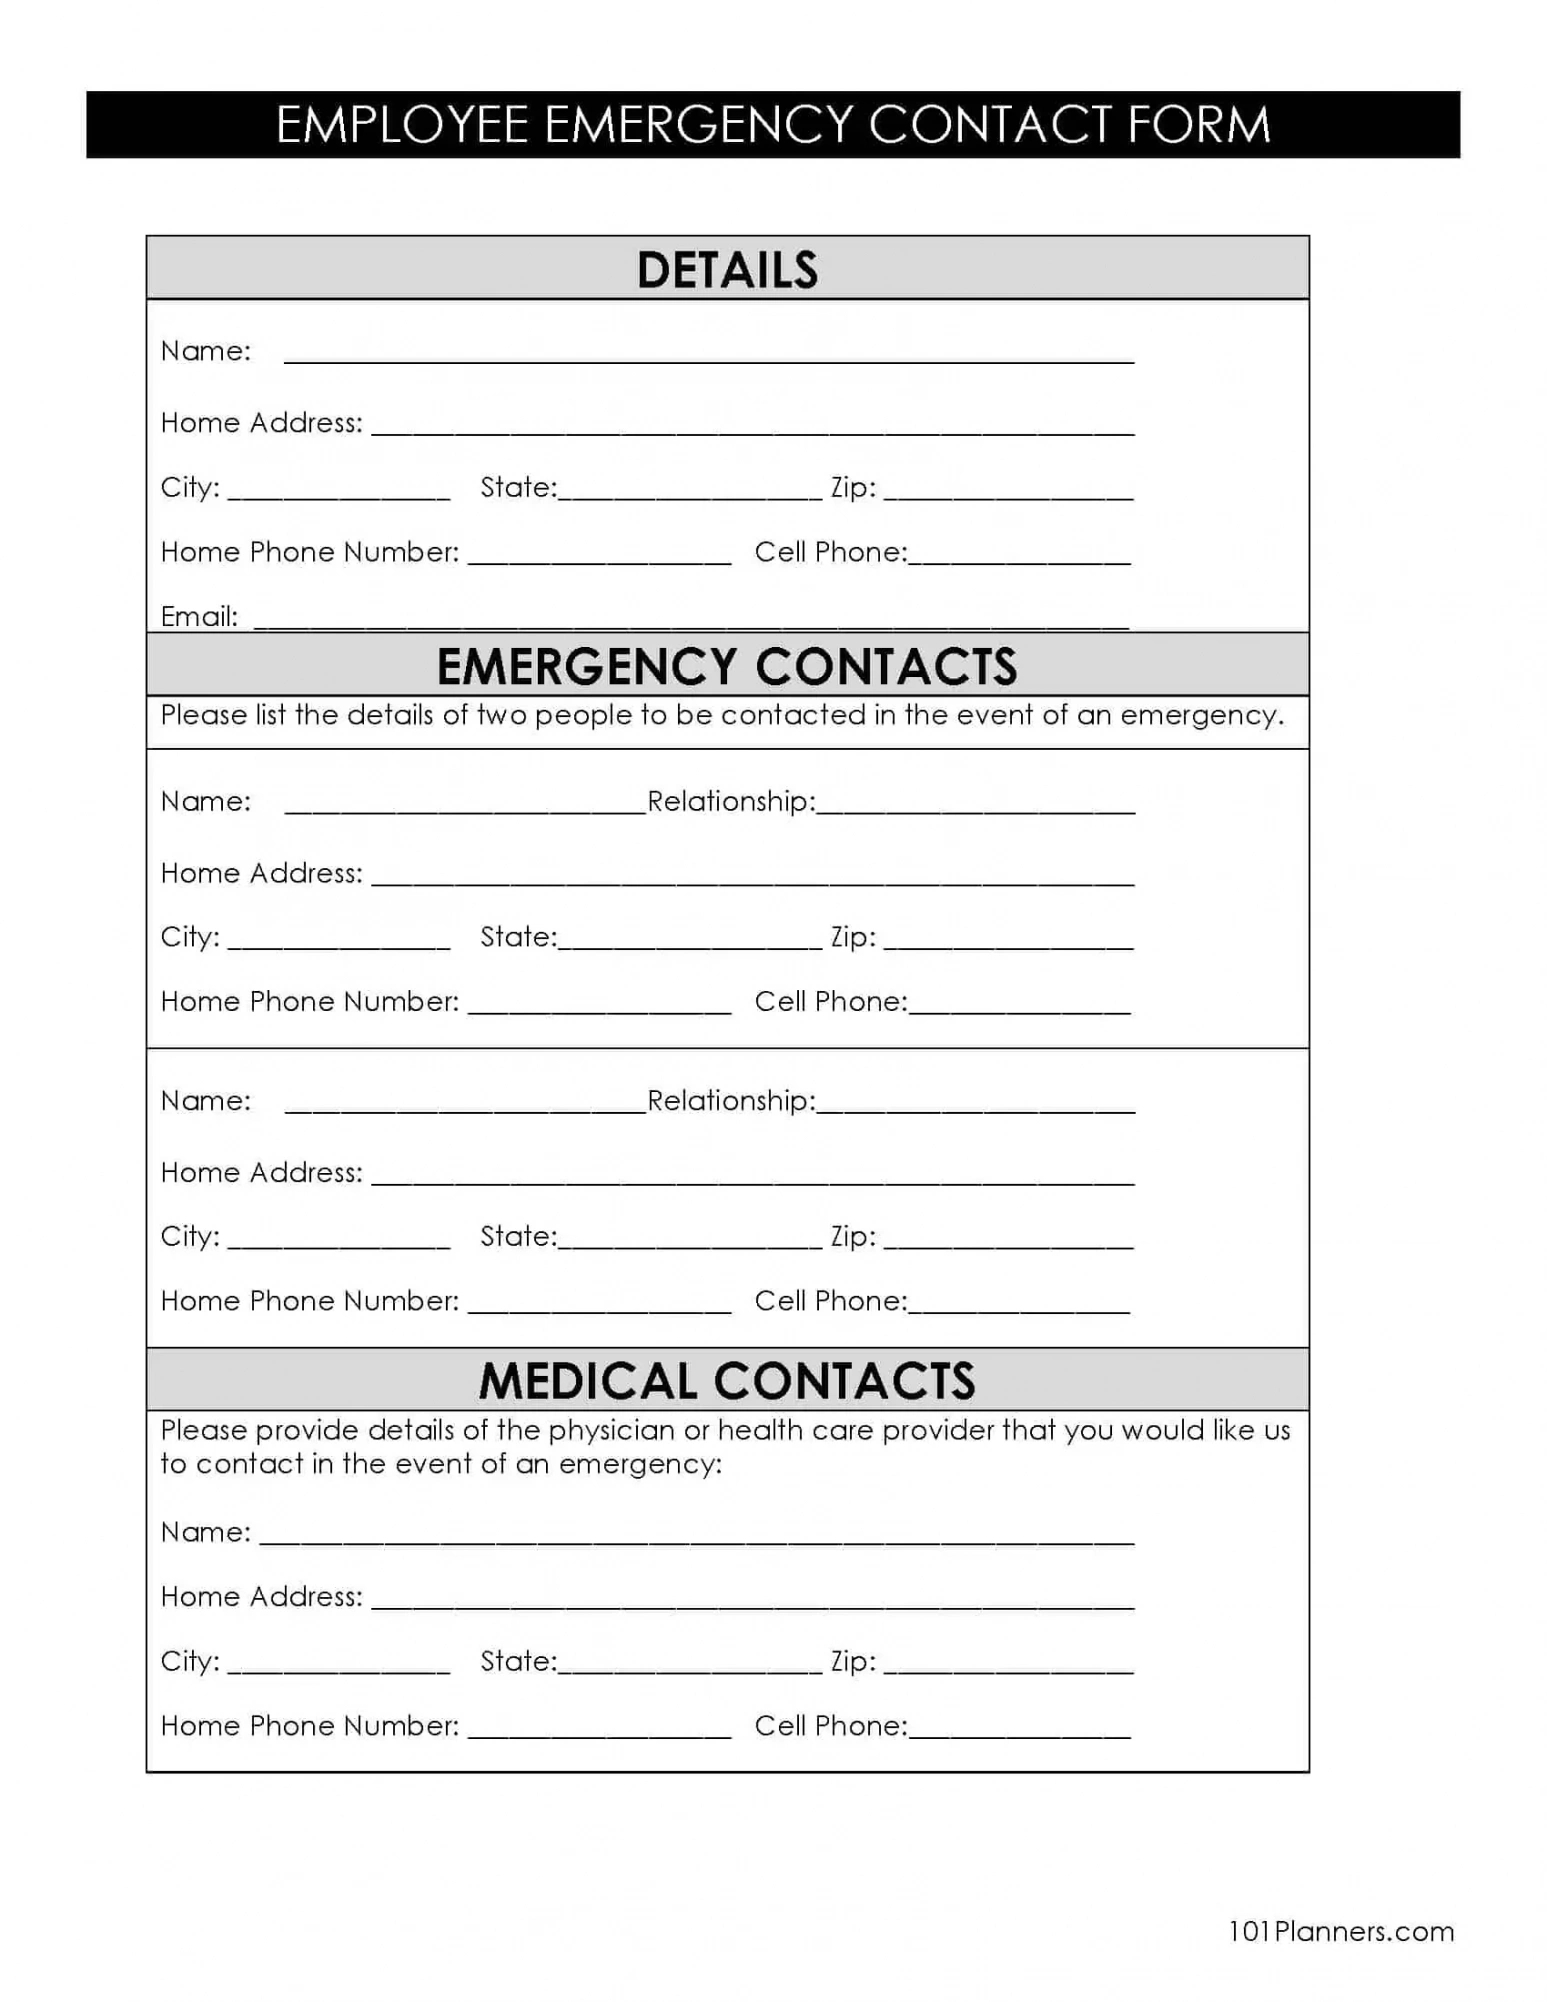 Staff Emergency Contact Form Template Doc Sample